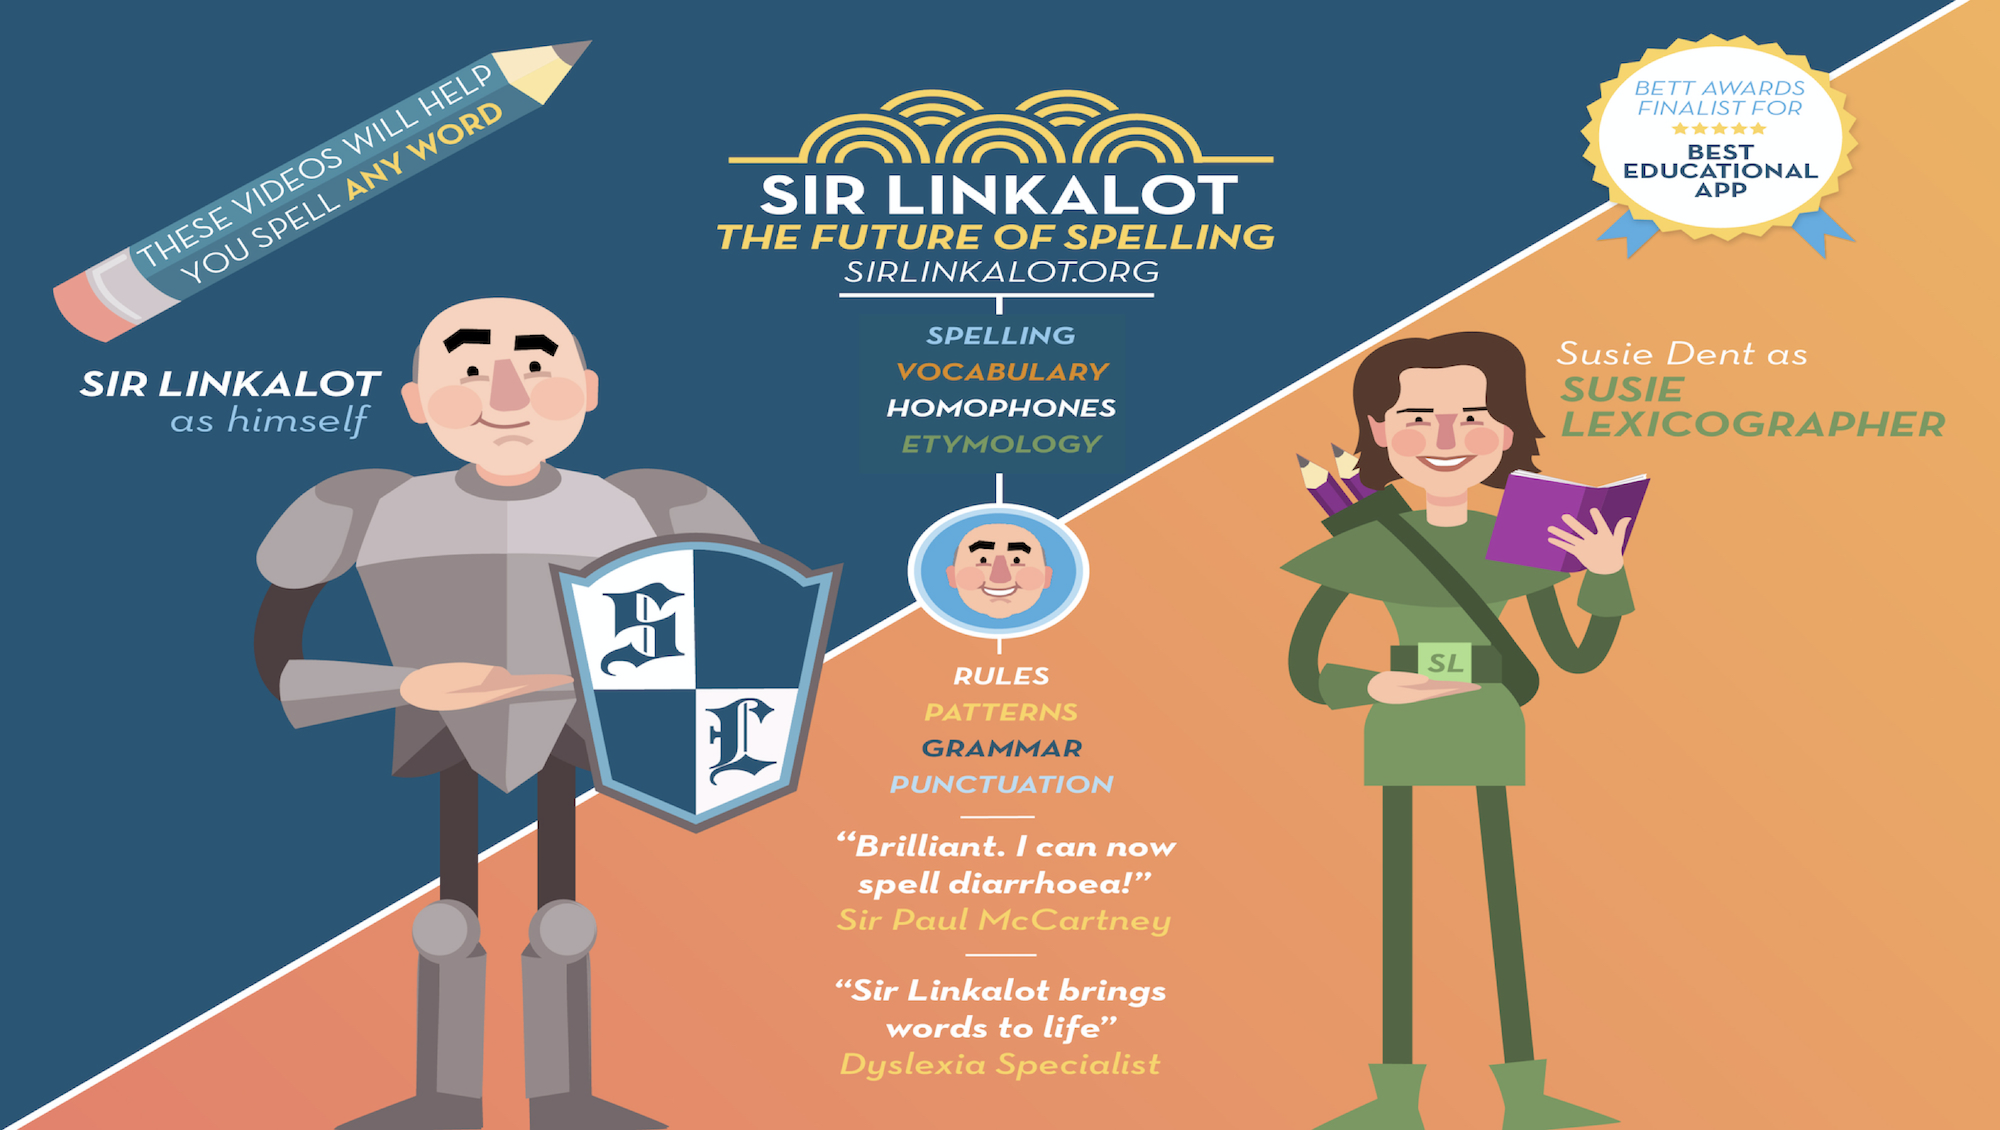 Edutainment Licensing appointed as distribution partner for Sir Linkalot